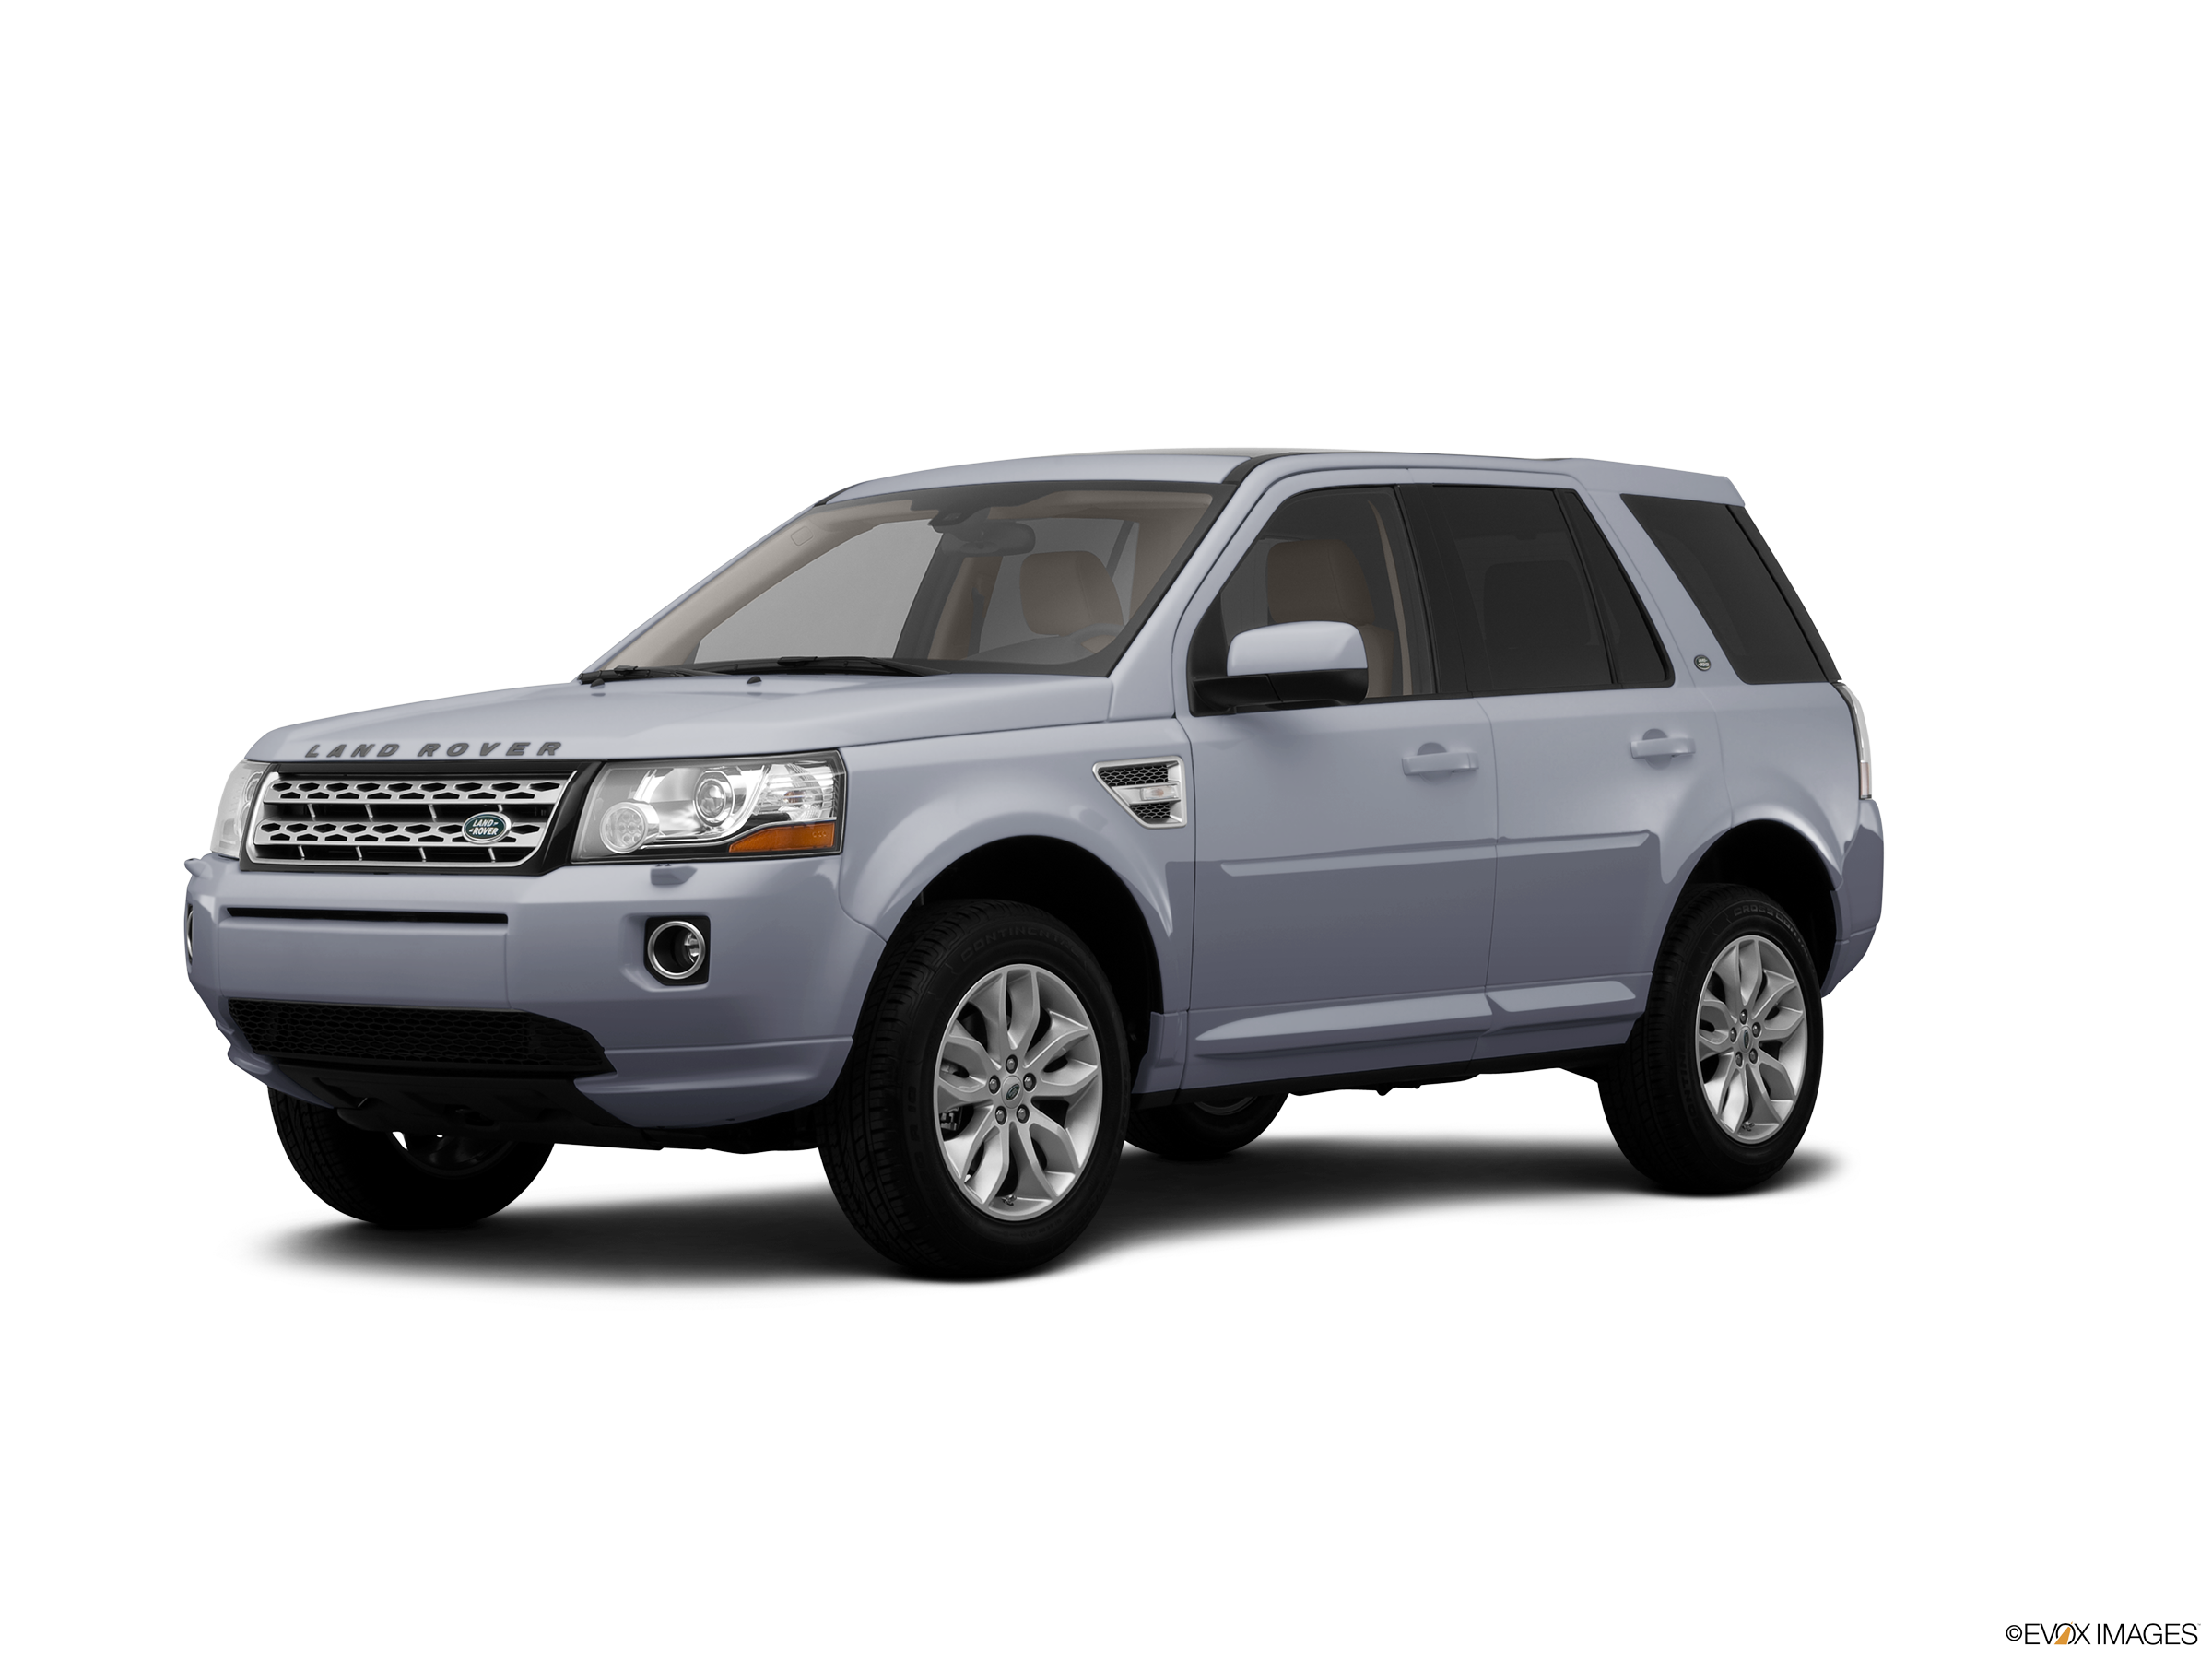 Used 2013 Prices Sport | Kelley Utility 4D Book Blue LR2 Land Rover